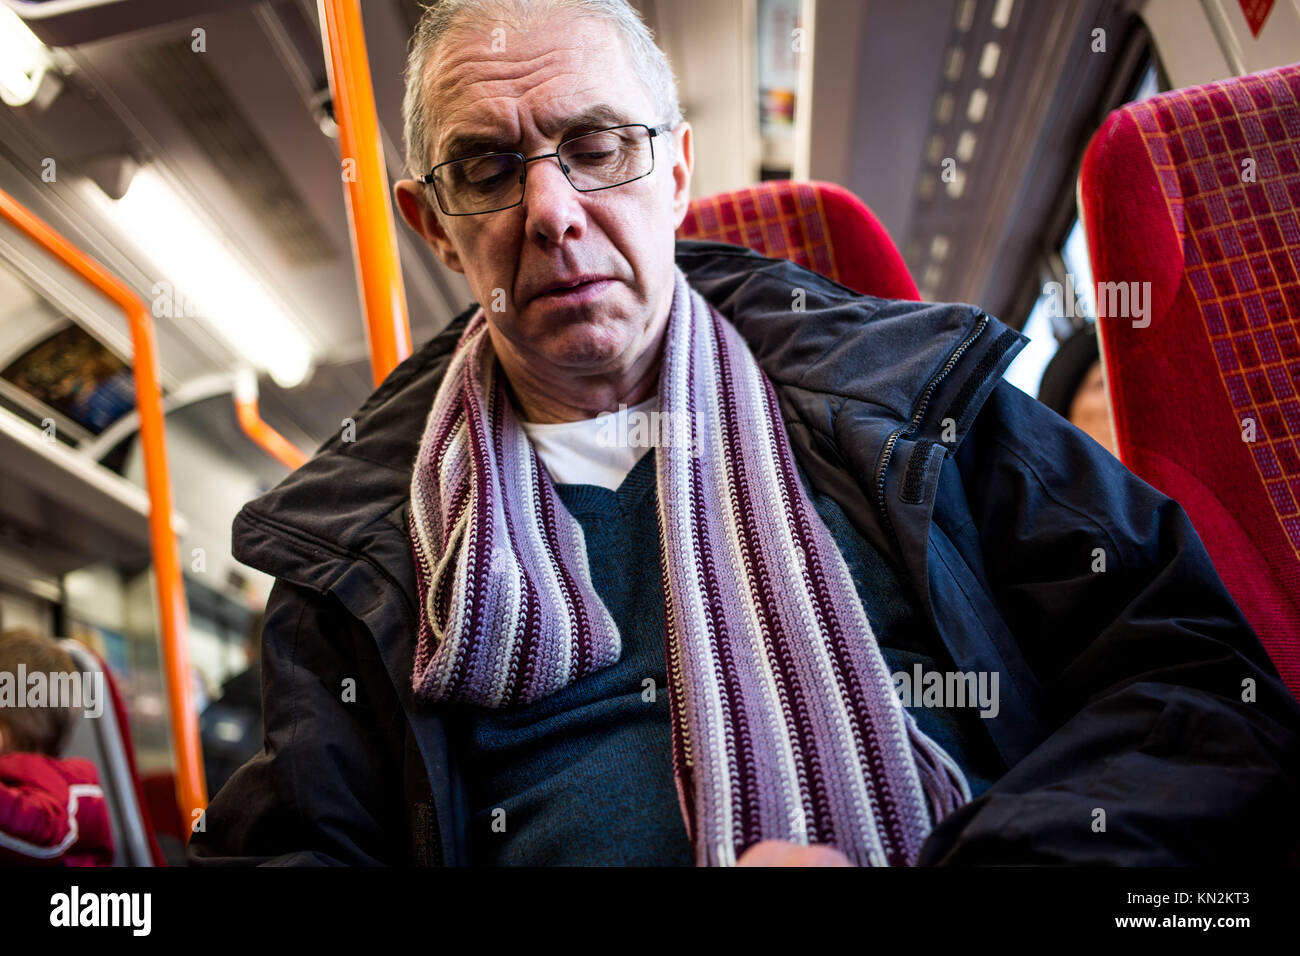 Candid Portrait of A Commuter Traveling on a Train In England Stock Photo